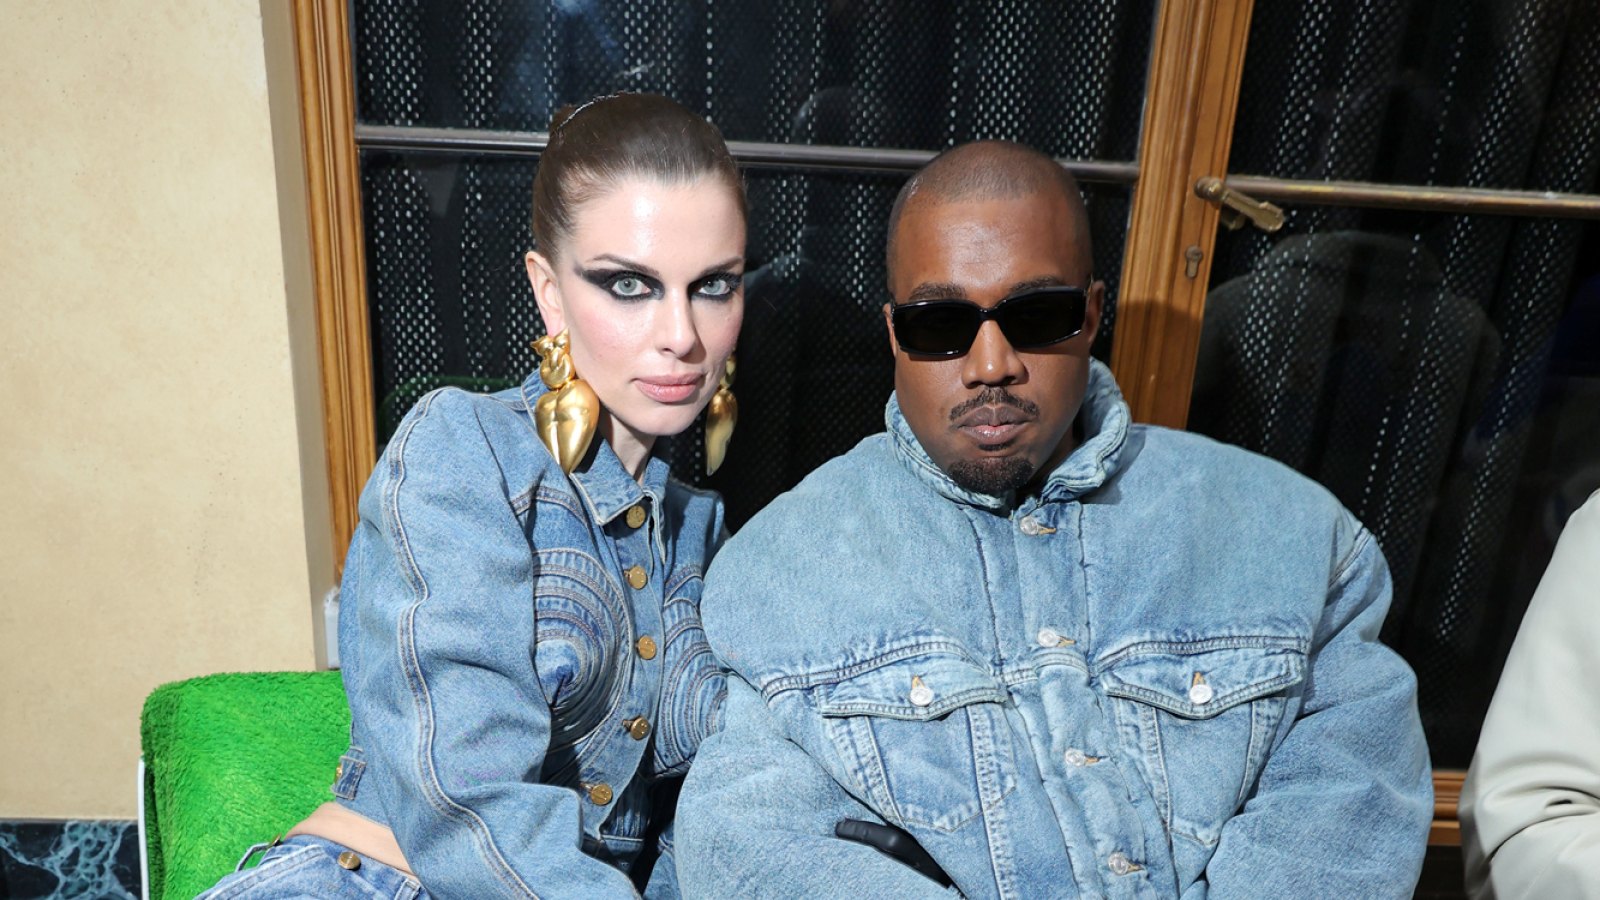 Julia Fox Will Include Details About Her Relationship With Kanye West in Upcoming Memoir